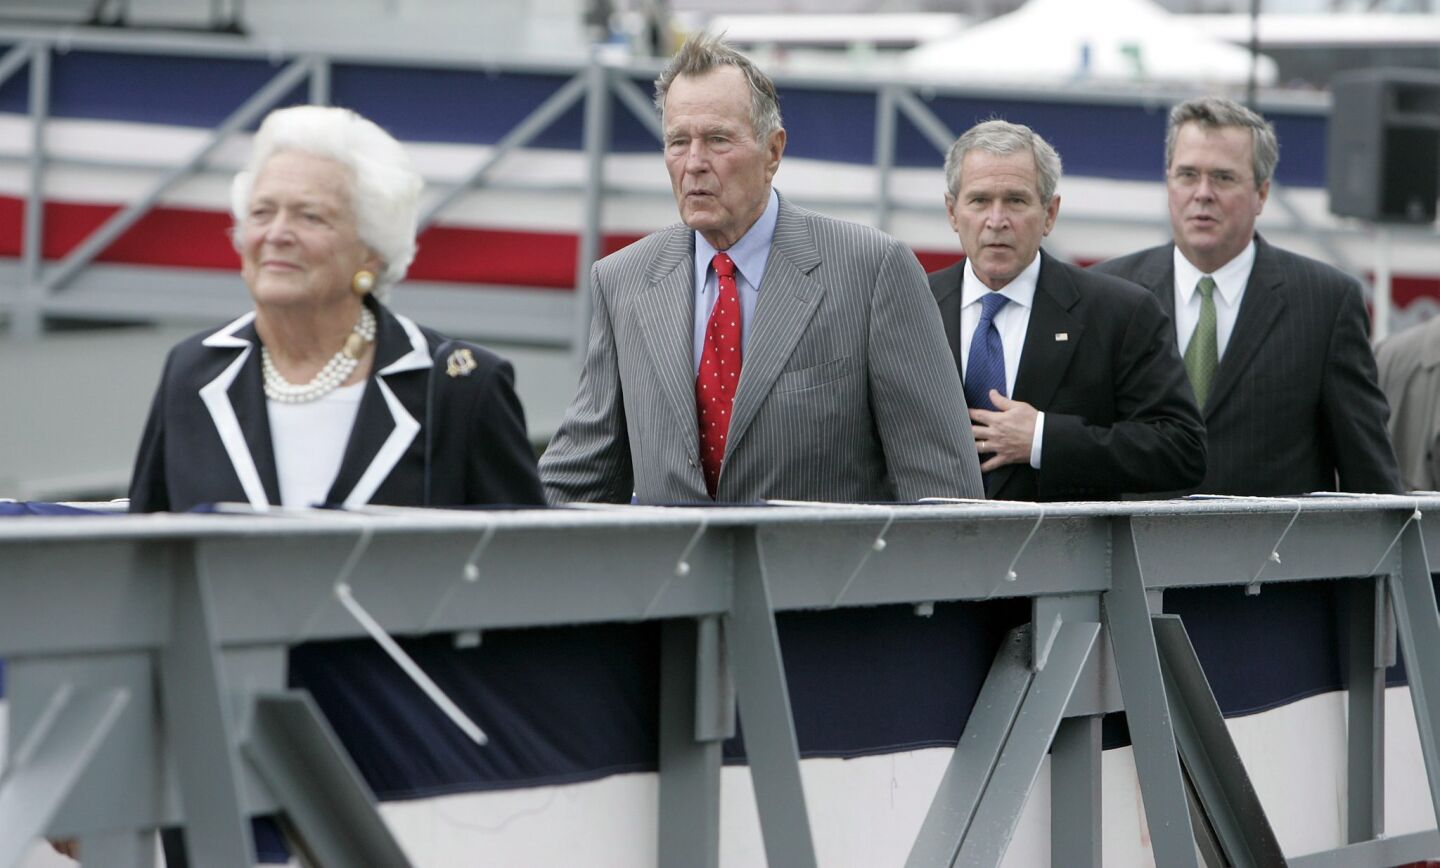 Barbara Bush walks in front of George H.W. Bush, George W. Bush and Jeb Bush at a christening ceremony for the U.S. Navy's new aircraft carrier the George H.W. Bush at Newport News, Va., on Oct. 7, 2006.